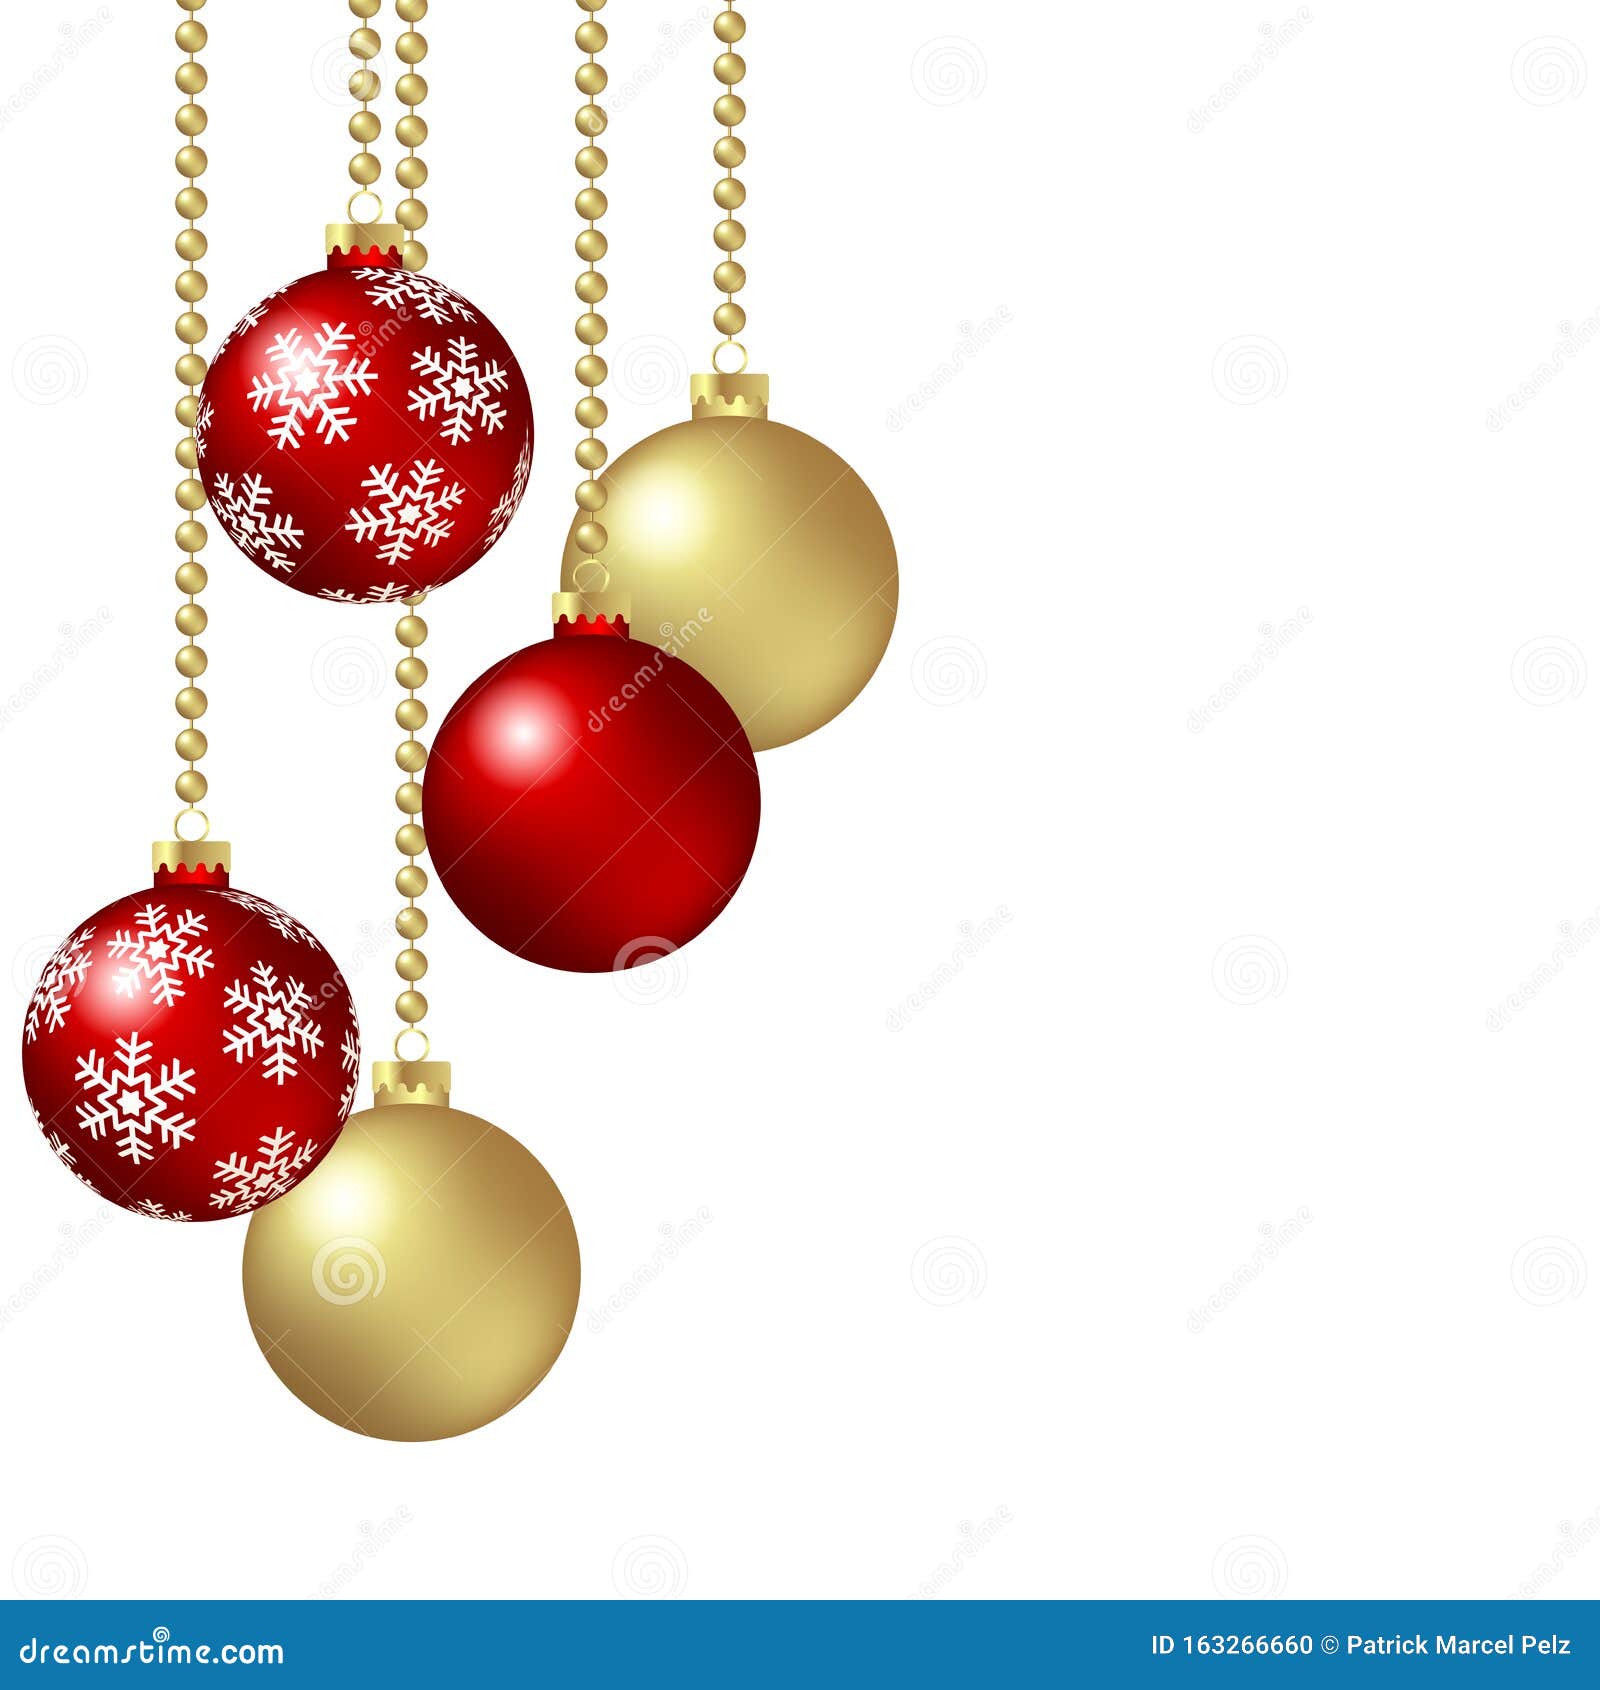 Hanging Christmas Baubles Concept Stock Vector - Illustration of ...